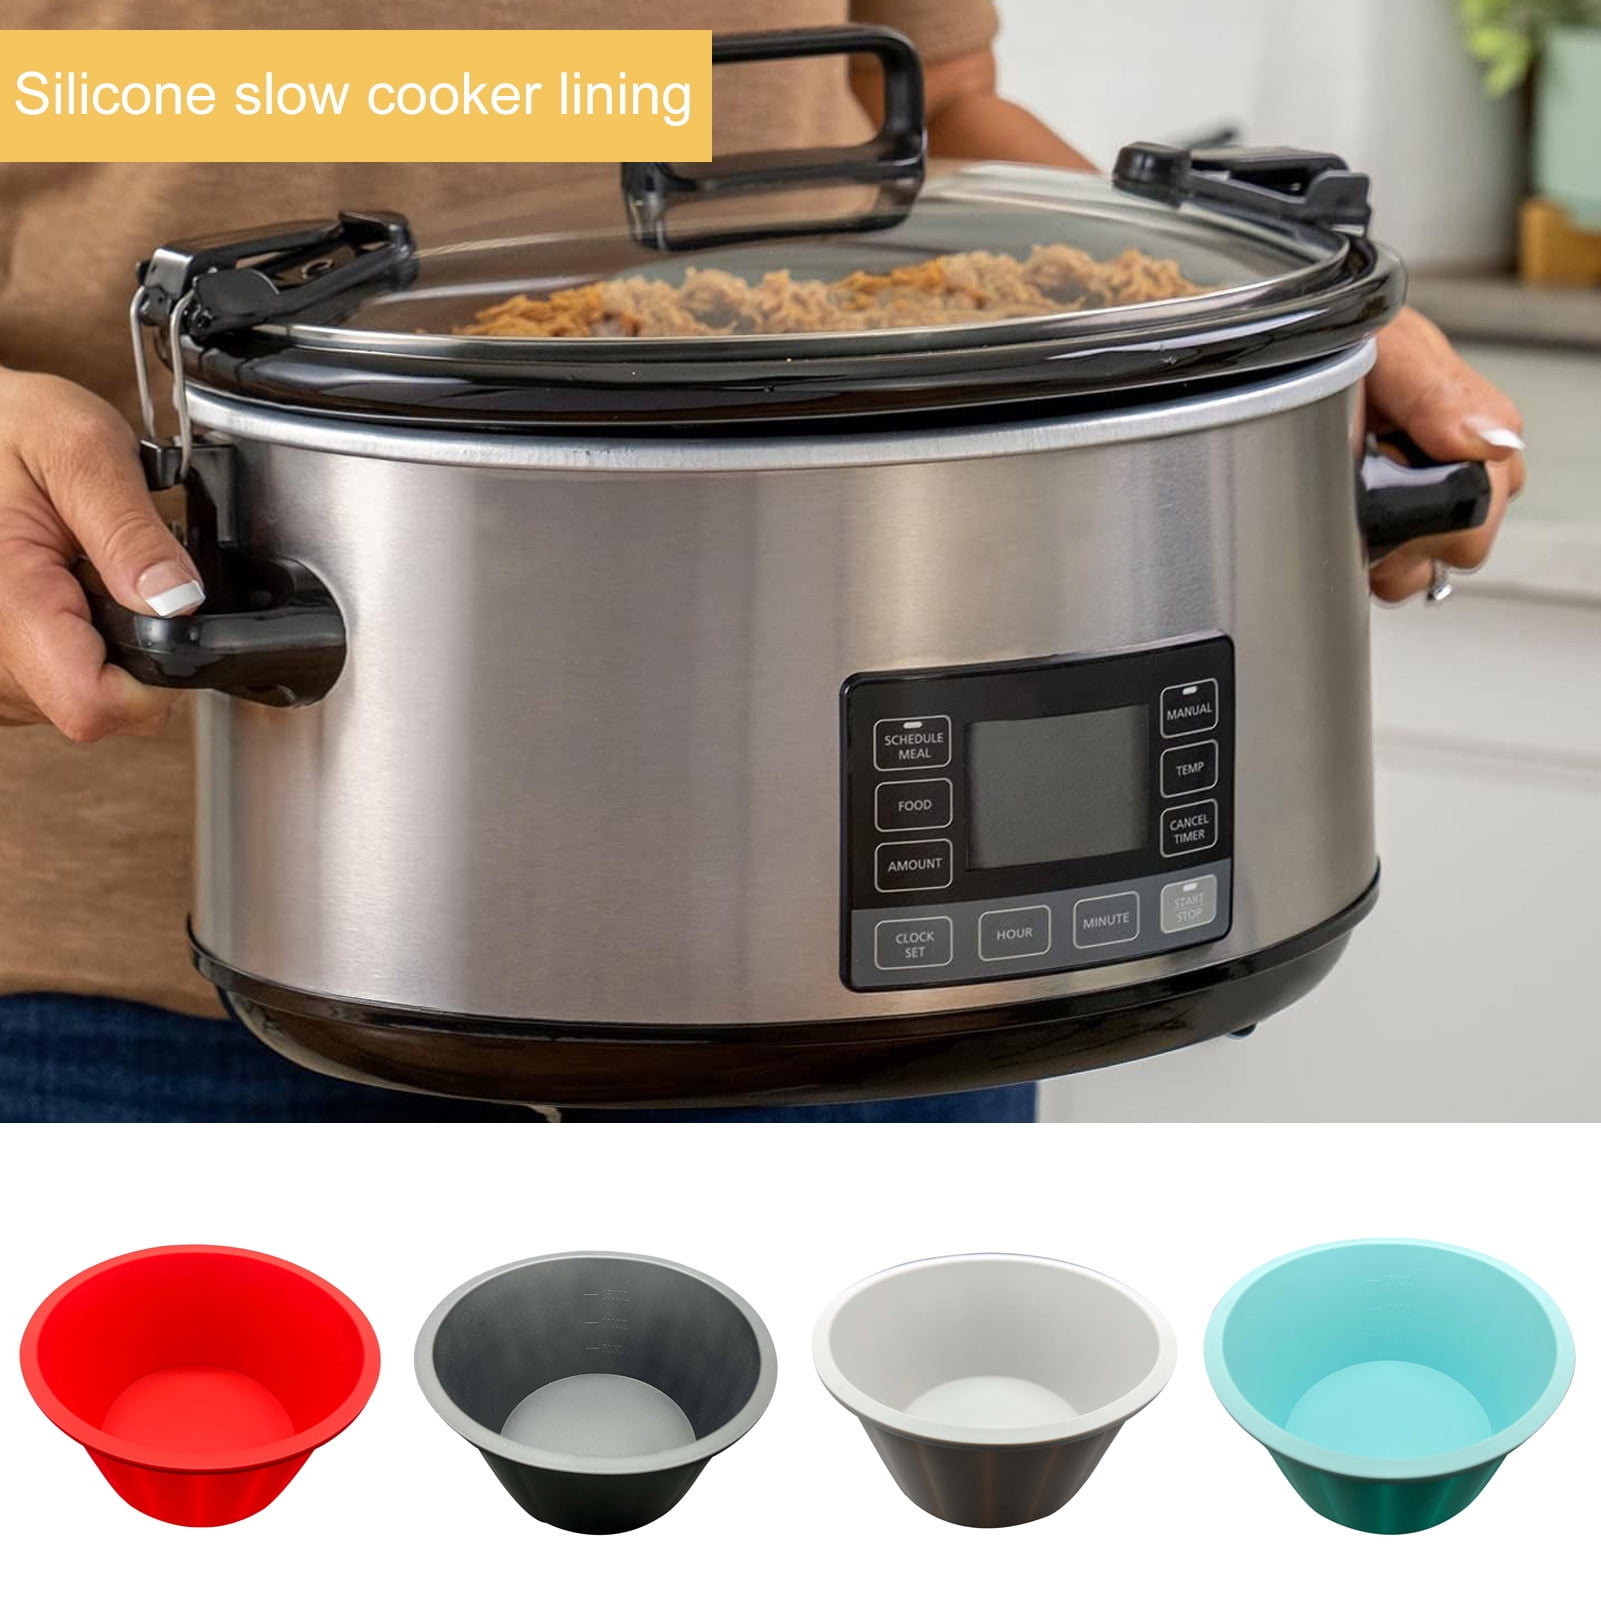 Kyoffiie Slow Cooker Liners Crock Pot Liner Leakproof & Easy Clean Silicone  Divider Fit 6-8 Quarts Slow Cooker Oval or Round Pot 